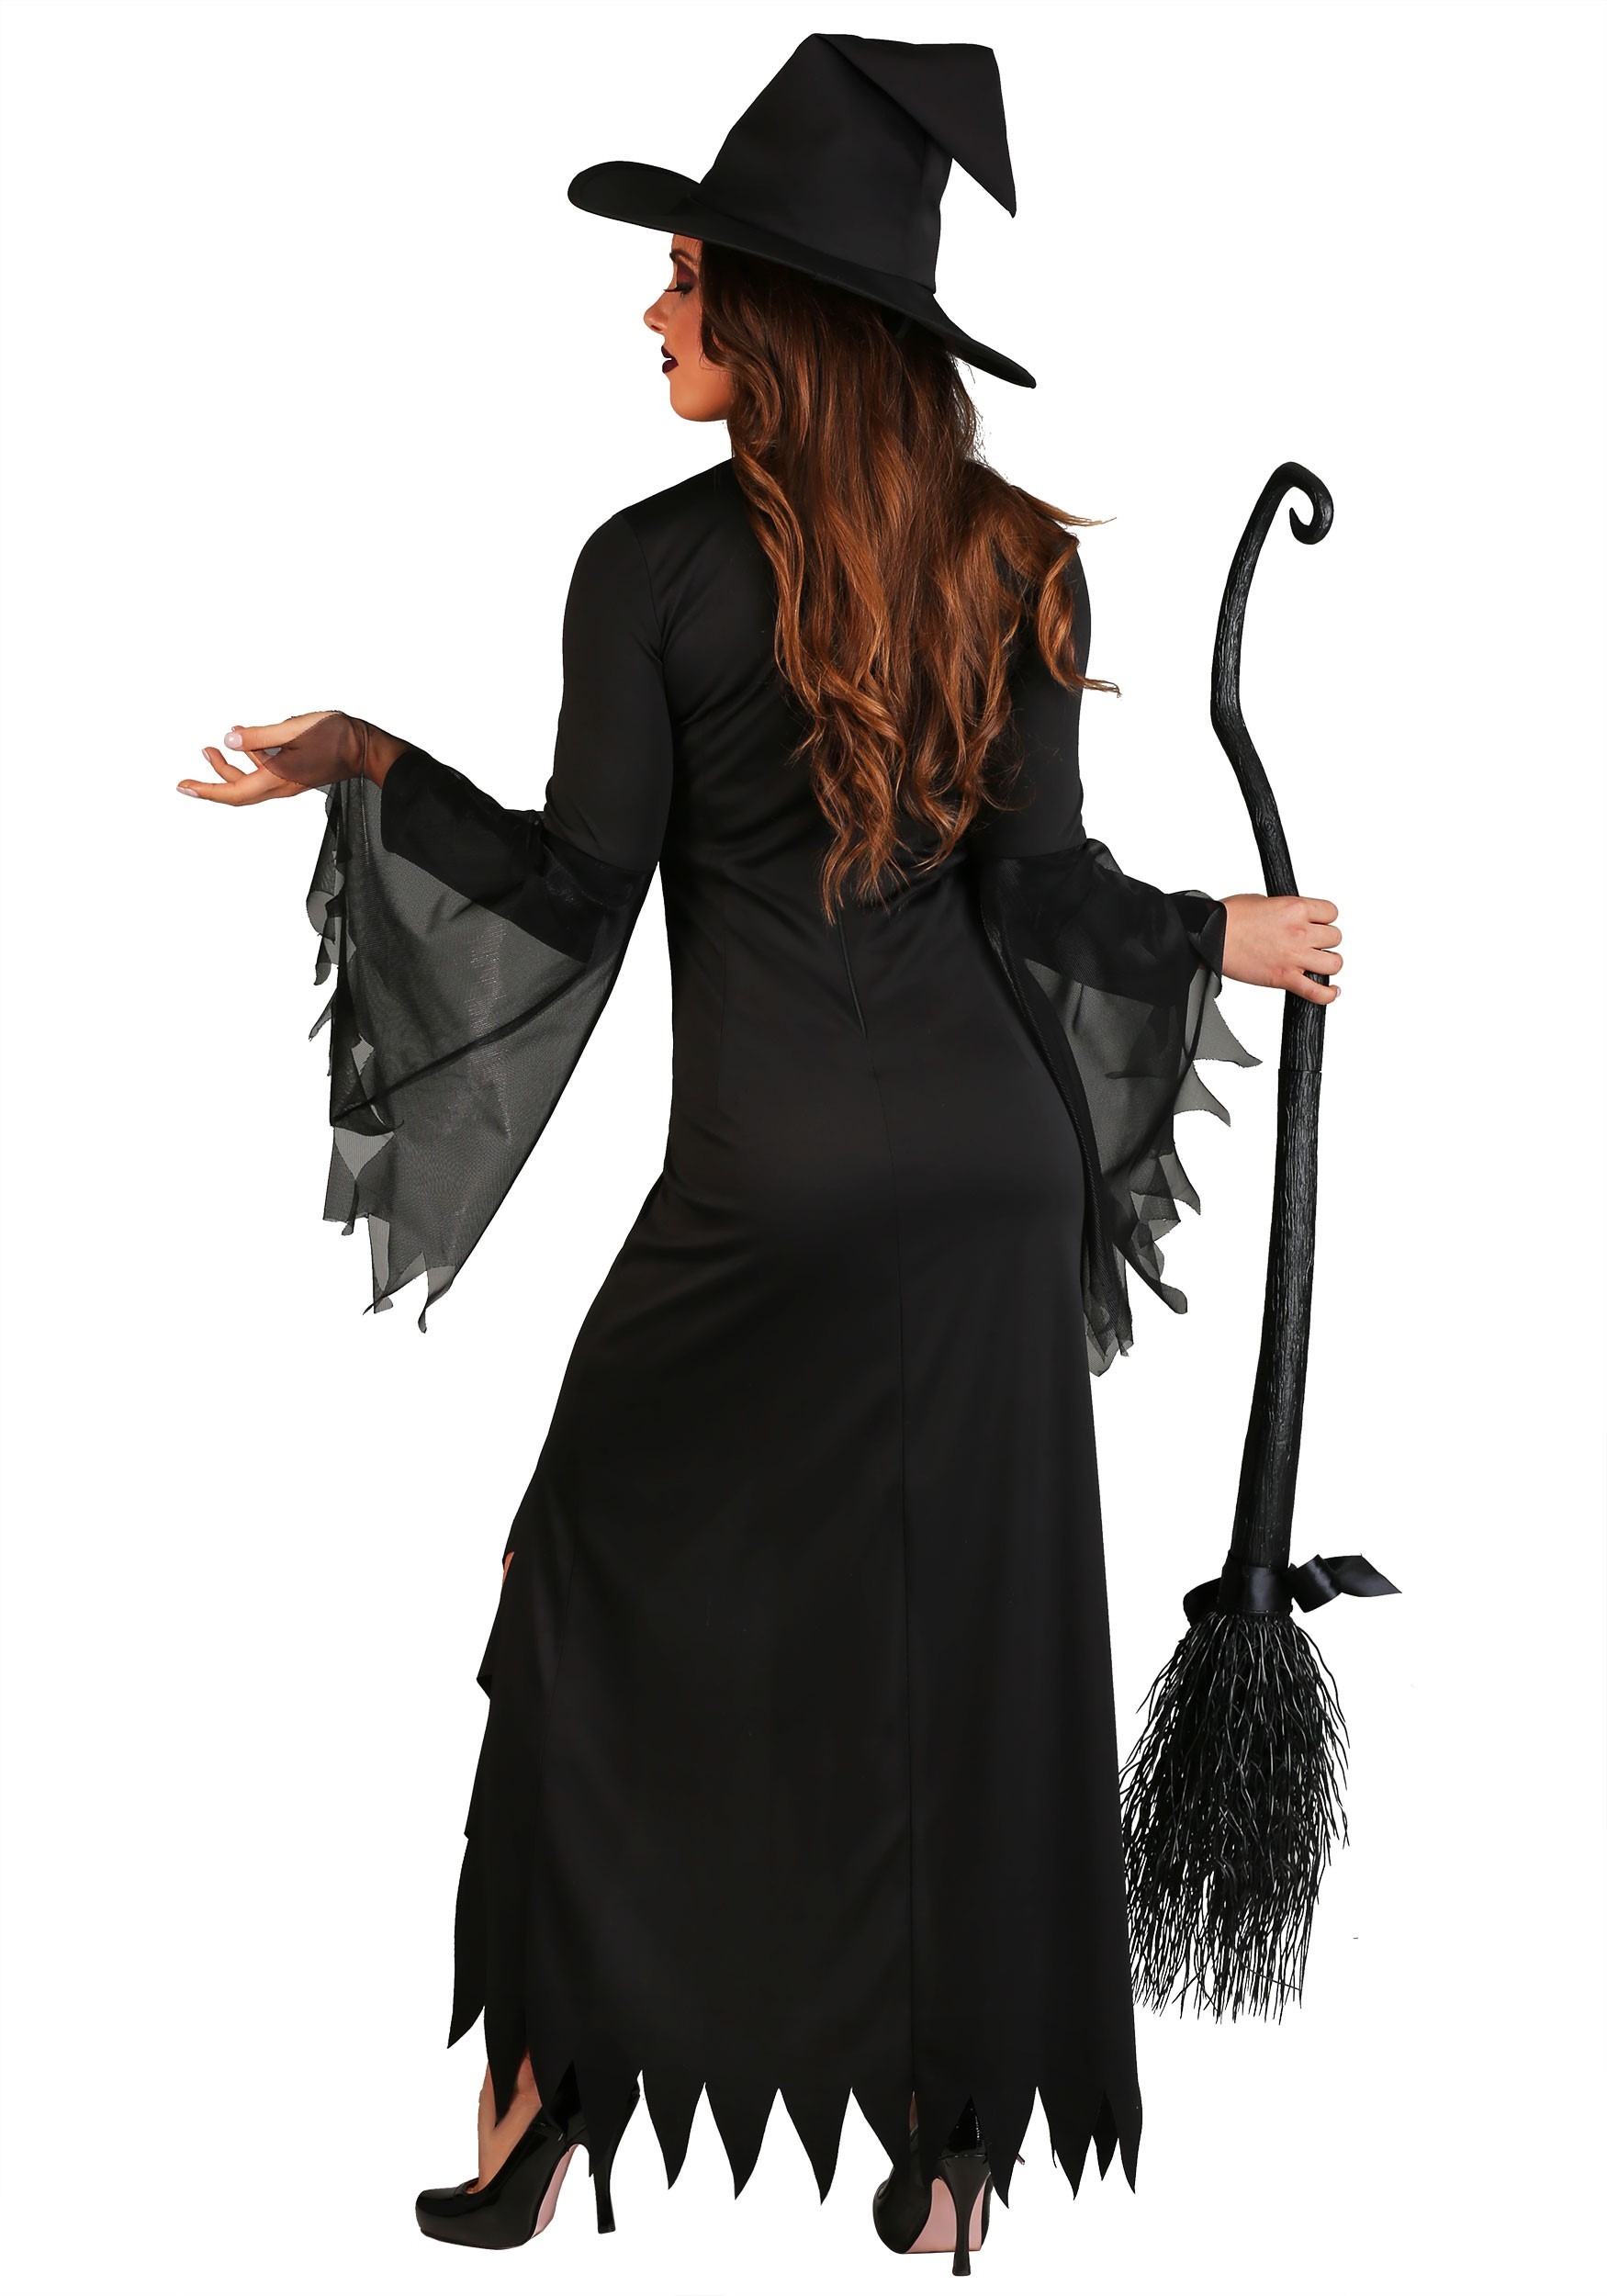 Women's Coven Countess Witch Fancy Dress Costume